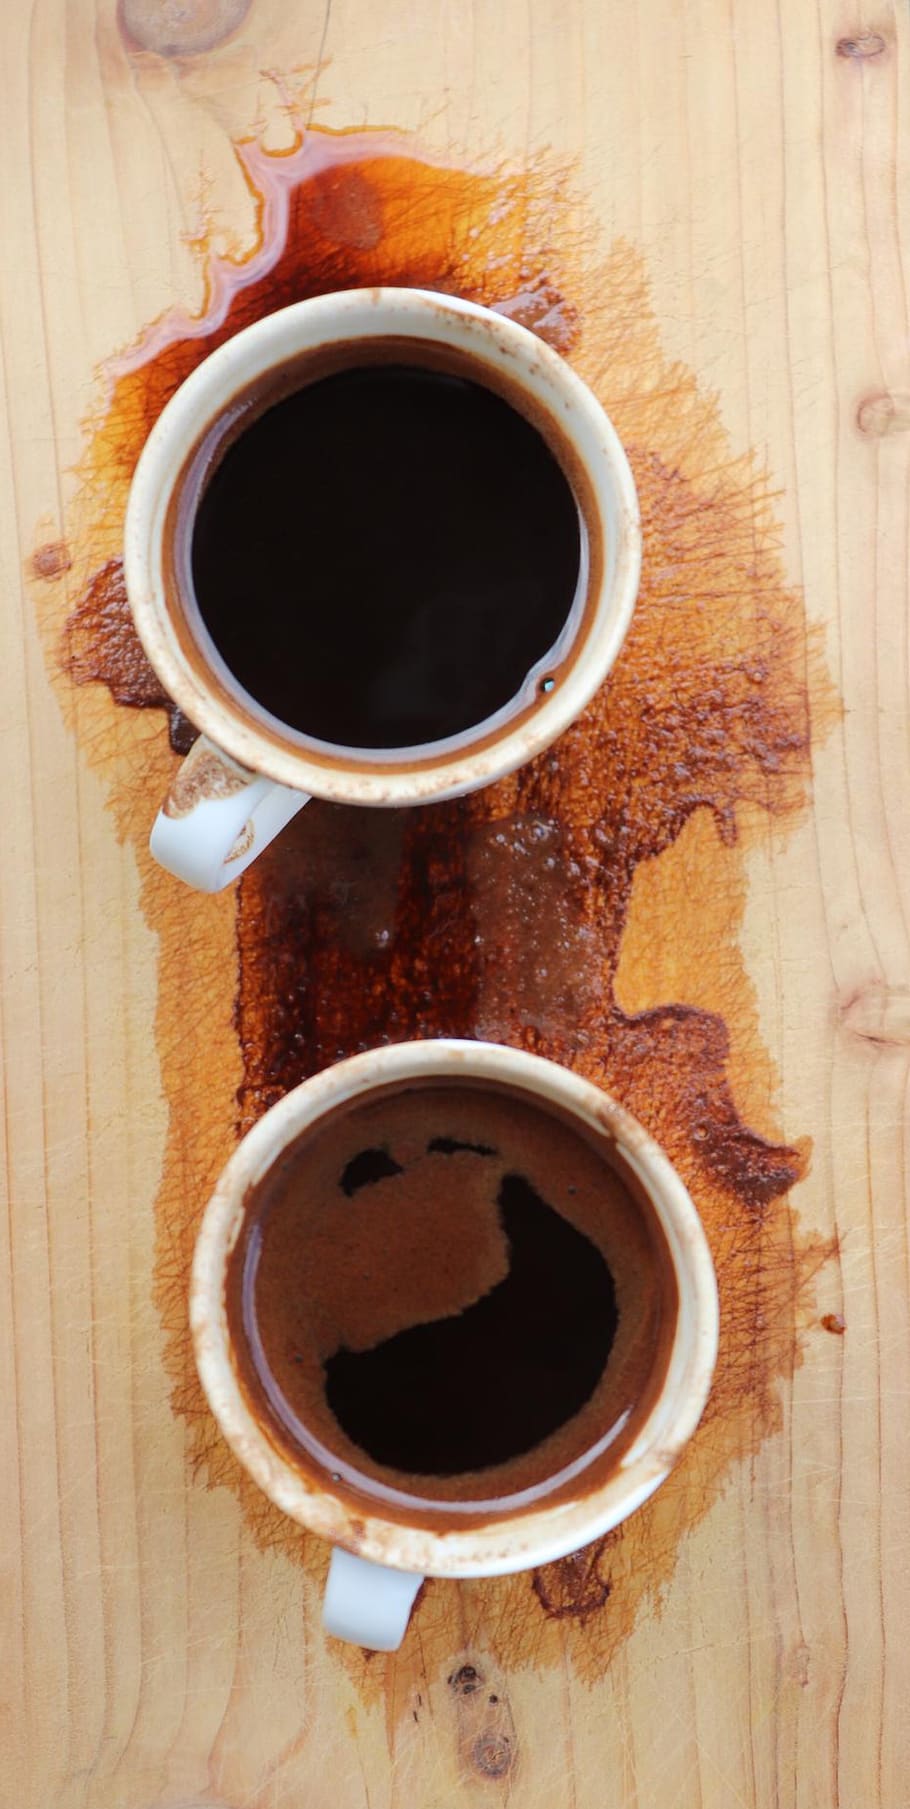 coffee time, turkish coffe, cups, black, wood, art, task, puddle, spilled coffee, food and drink